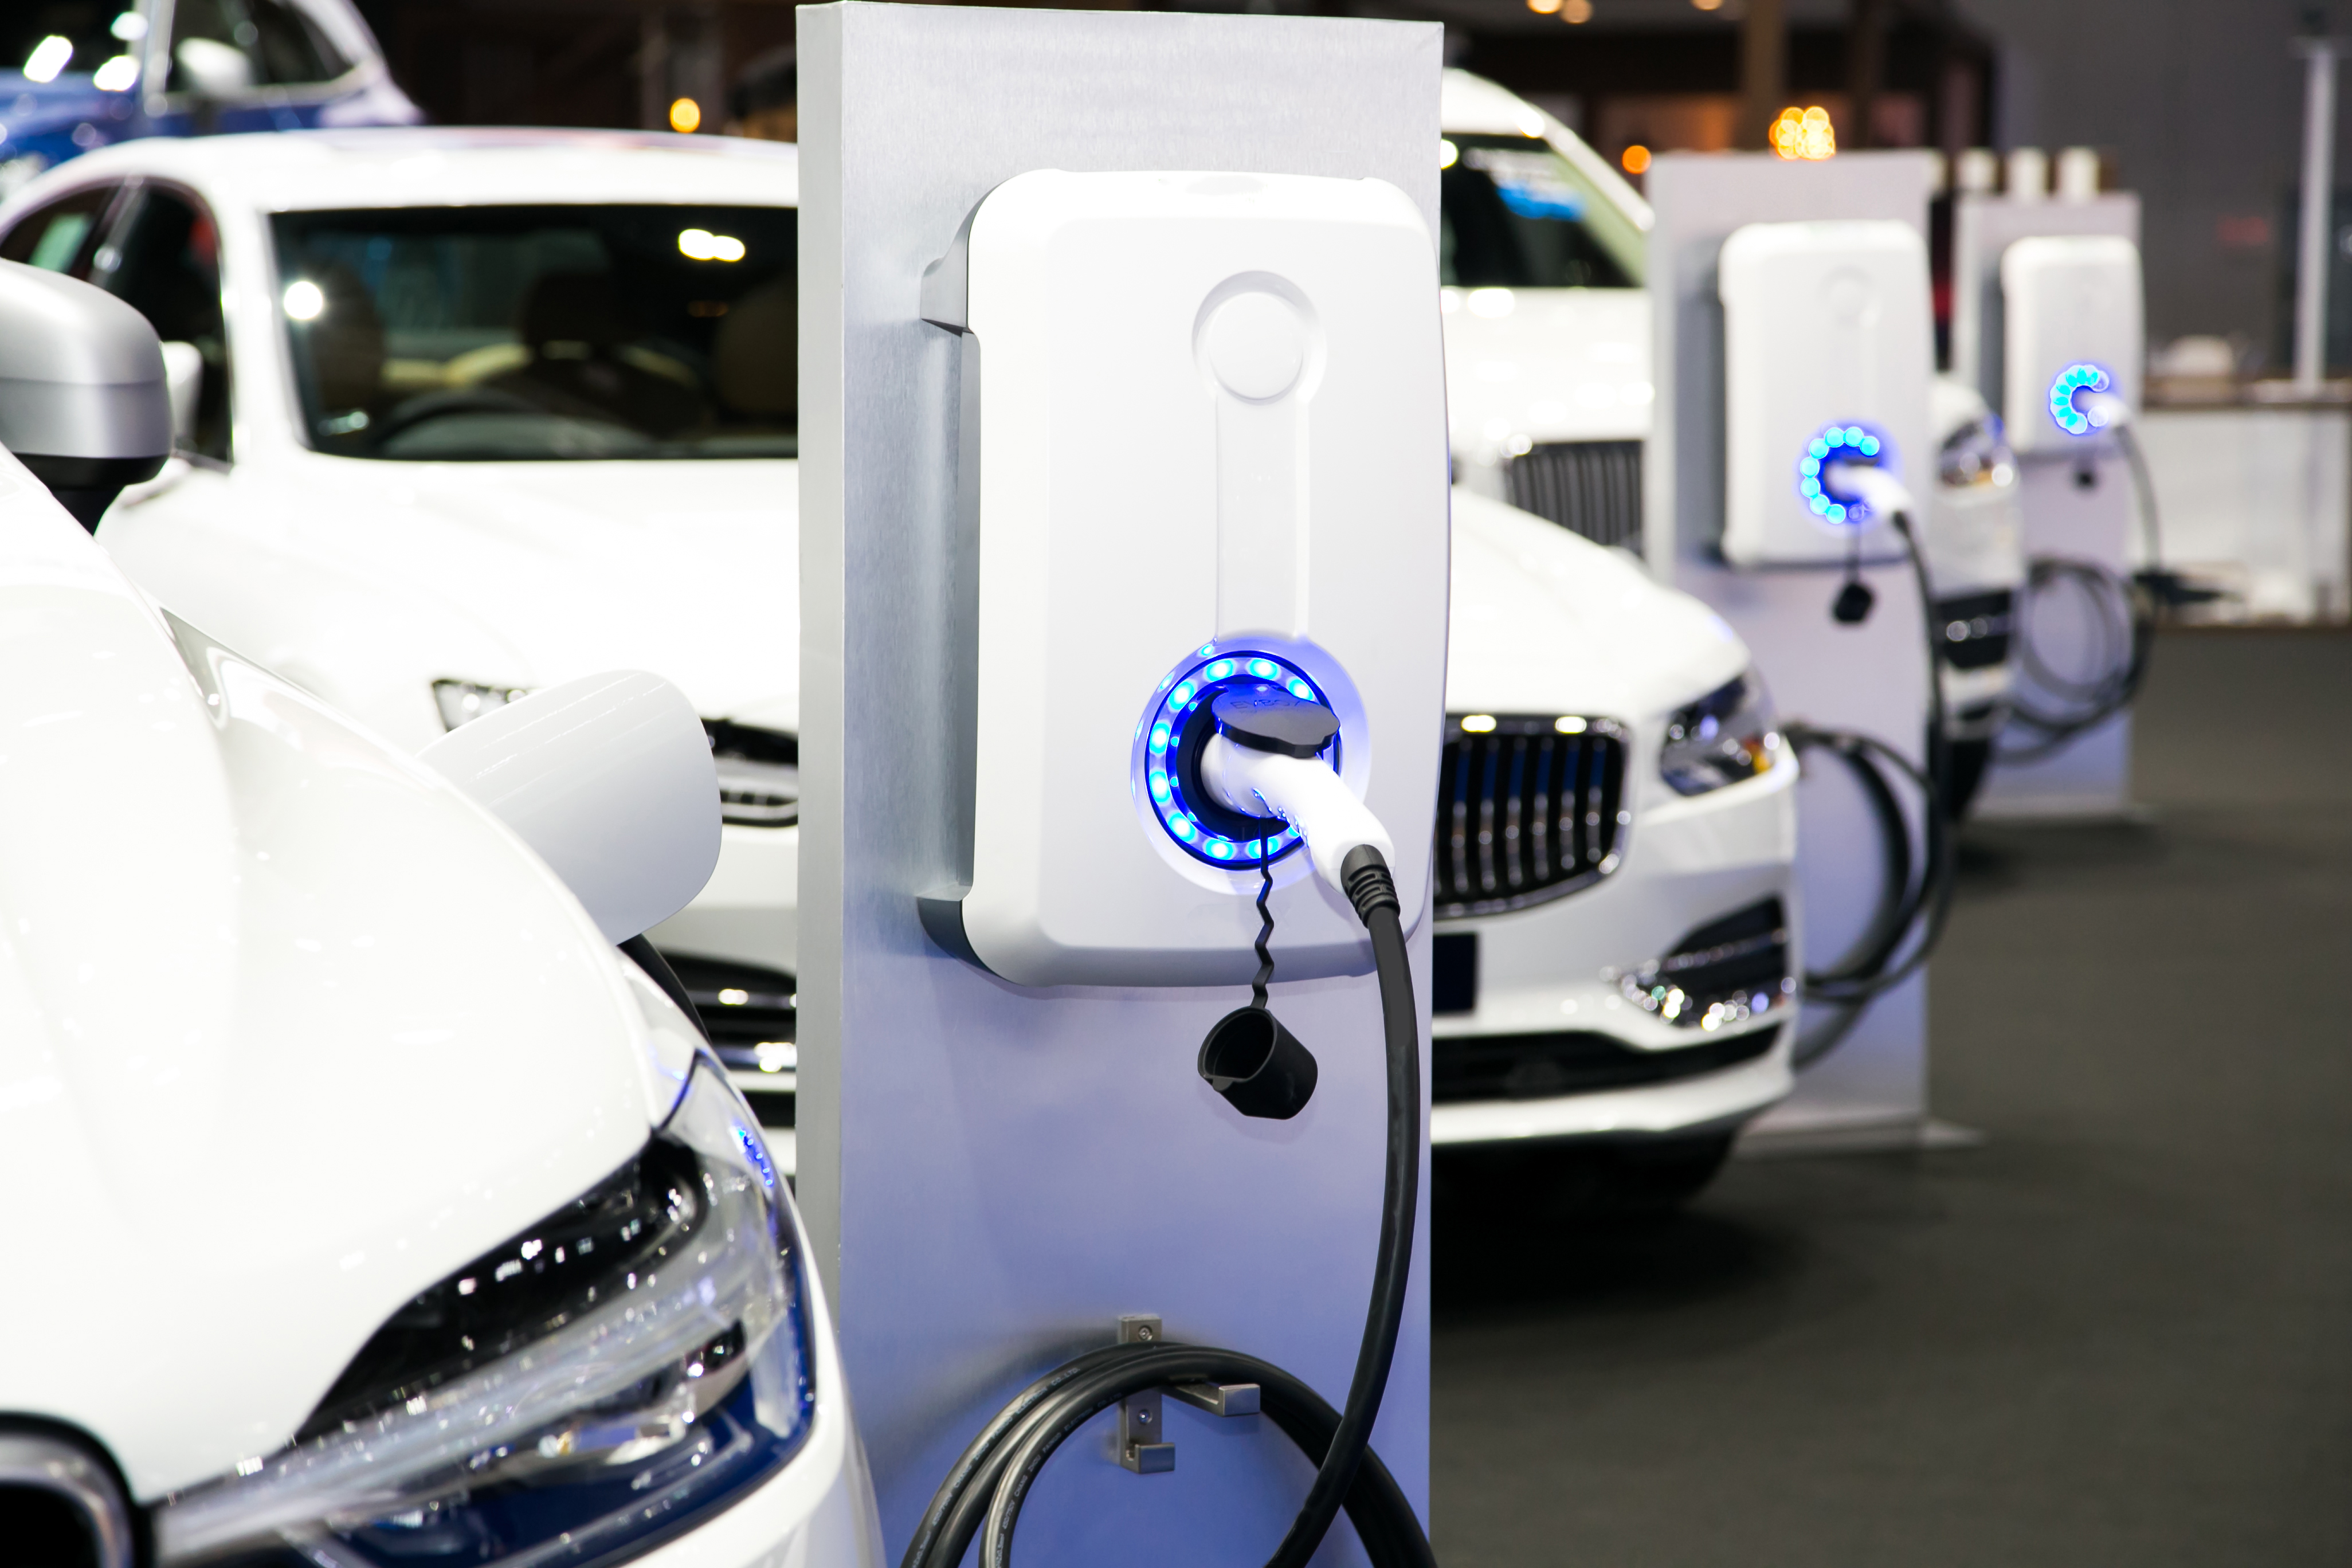 Nationwide Charger Shortages: The Future of EVs